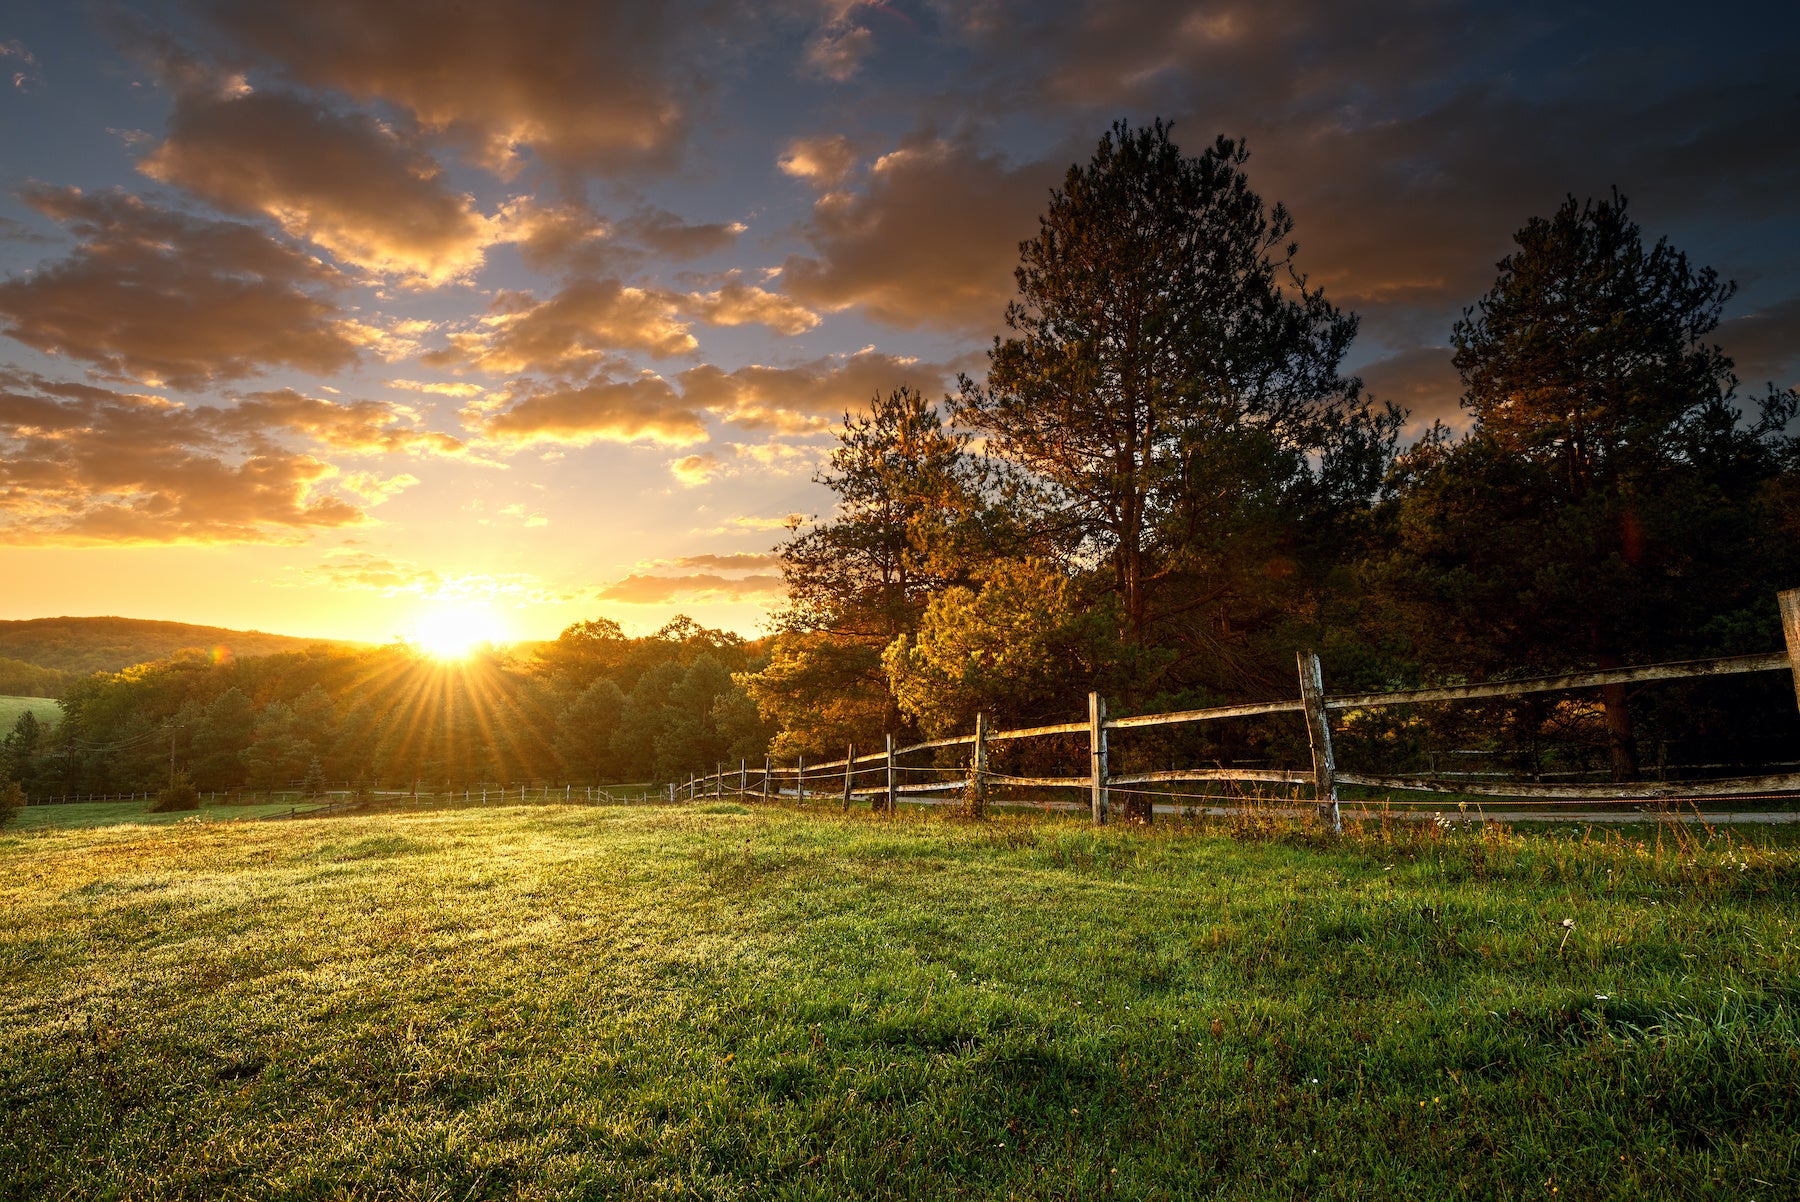 An image of a sunset over a field and a fence.